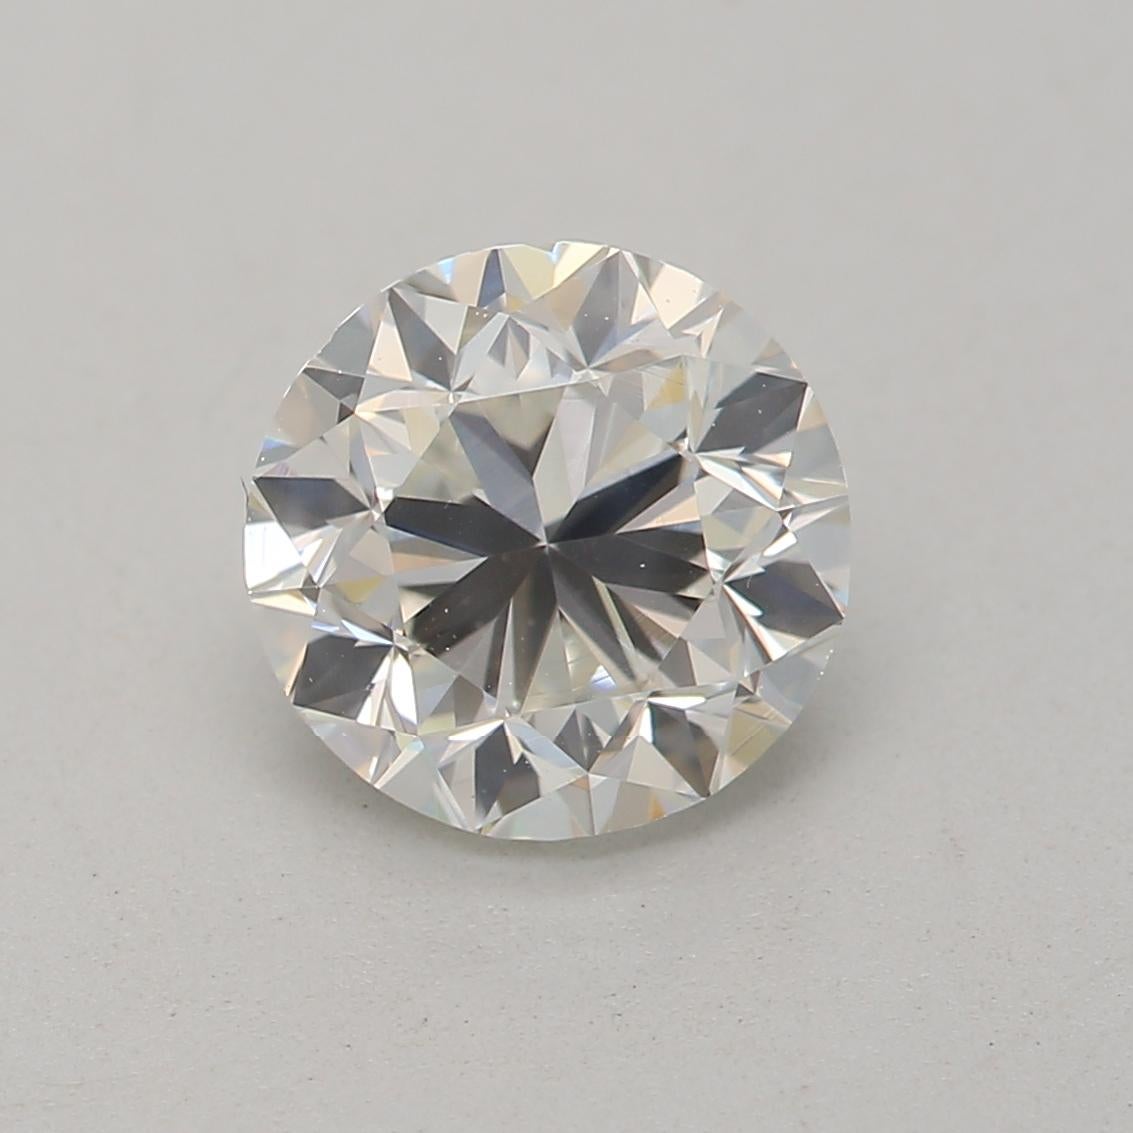 1.00 Carat Round Cut Diamond VS2 Clarity GIA Certified For Sale 2